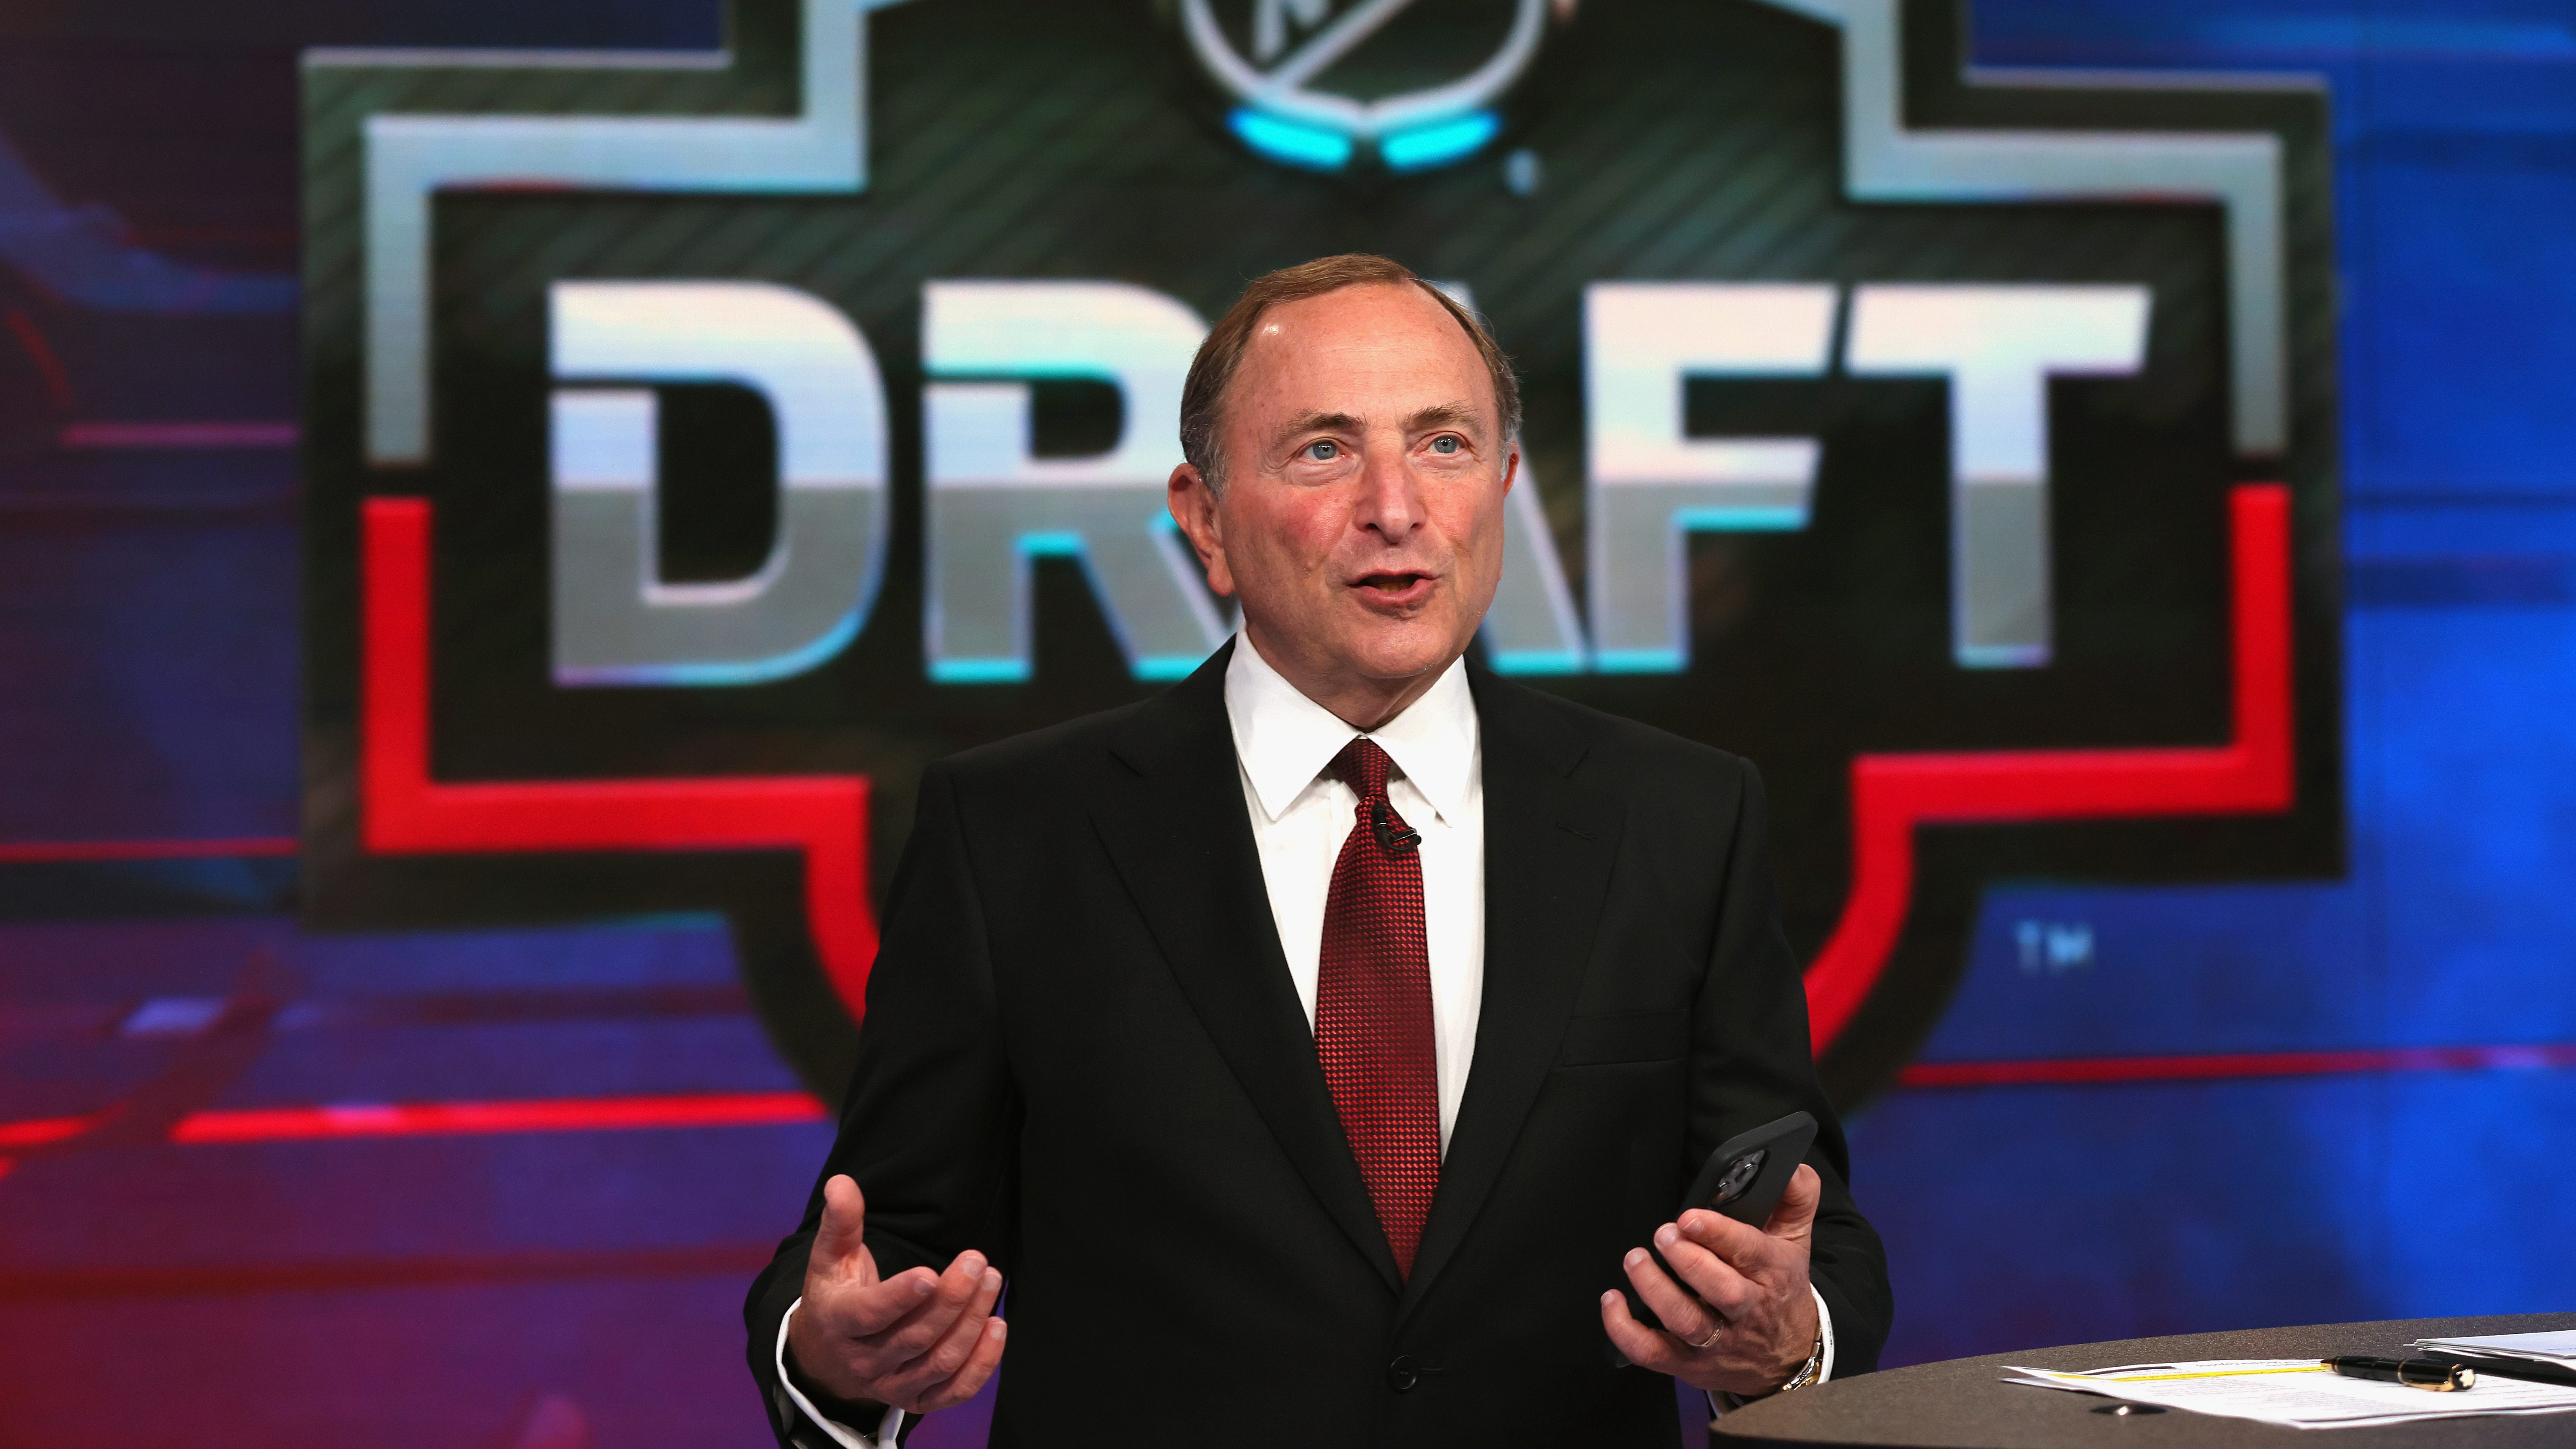 NHL Draft 2023 Dates, top prospects and more to know